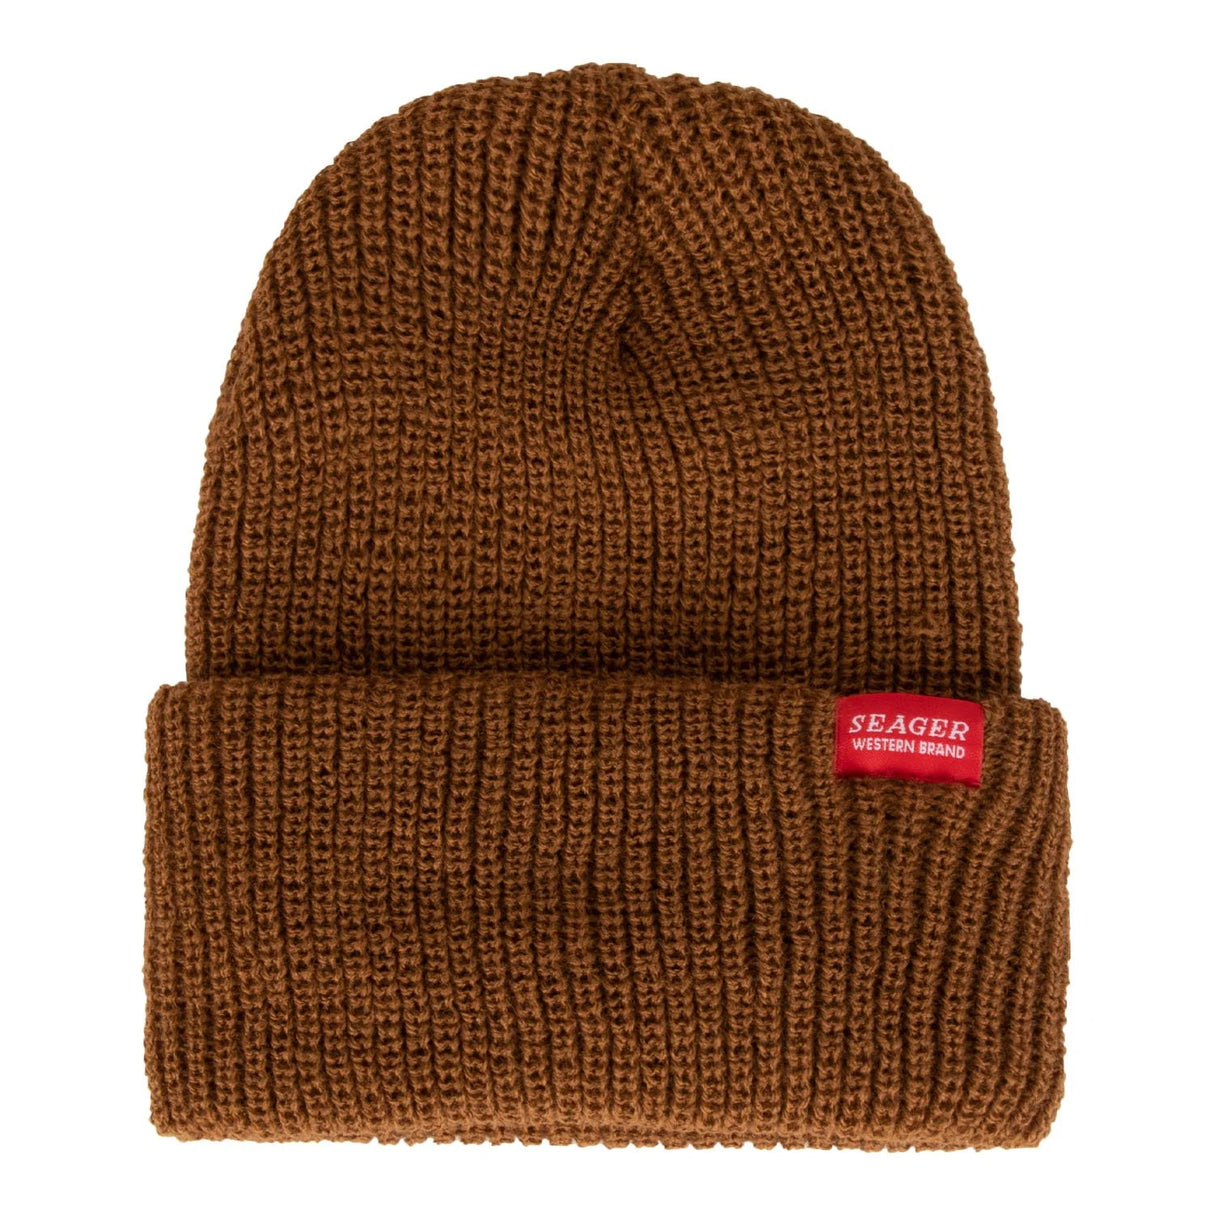 Seager Range Coyote Brown Beanie